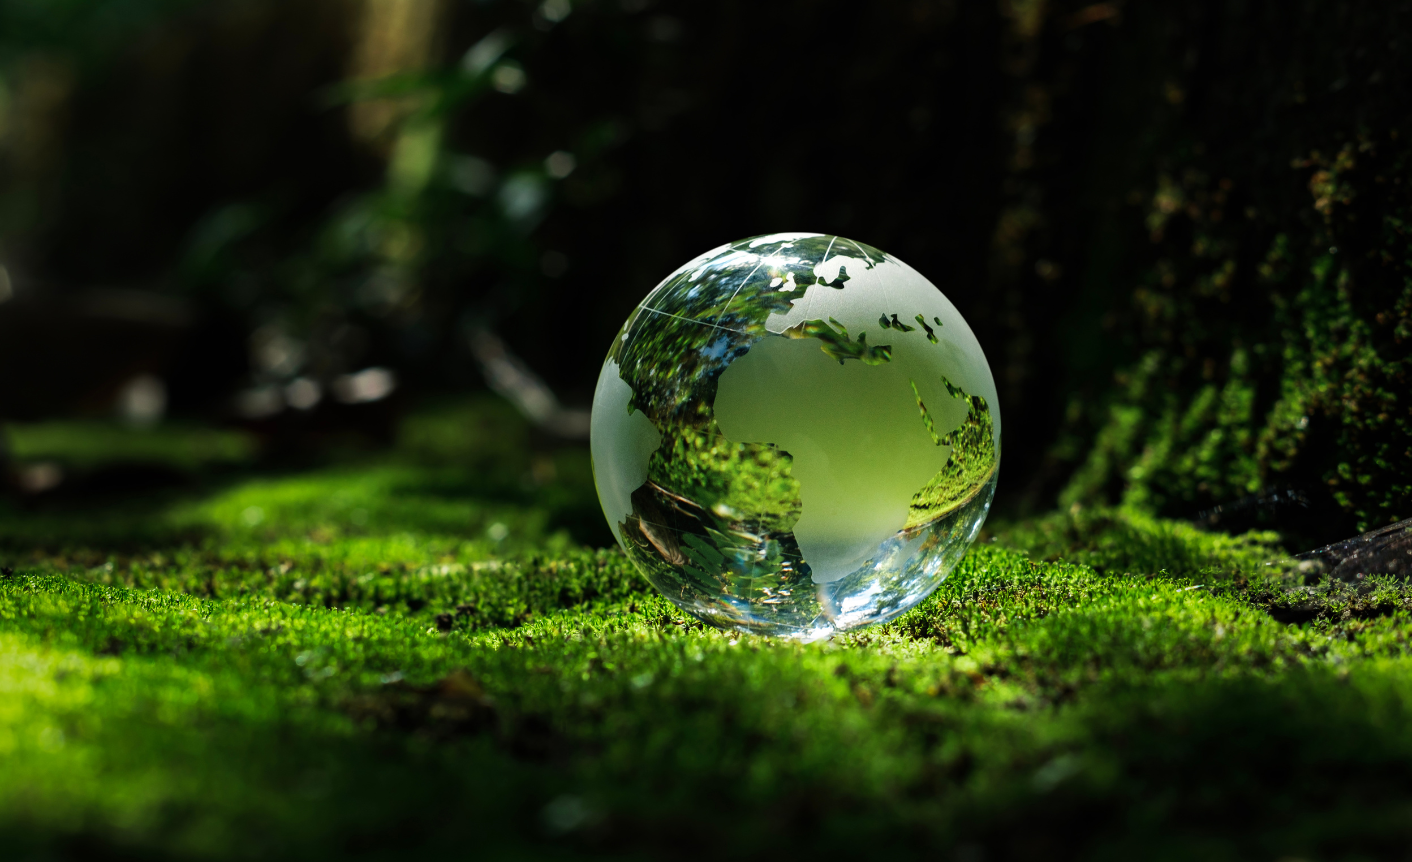 On a mossy, green background a glass globe sits in the foreground to represent enterprise translation.